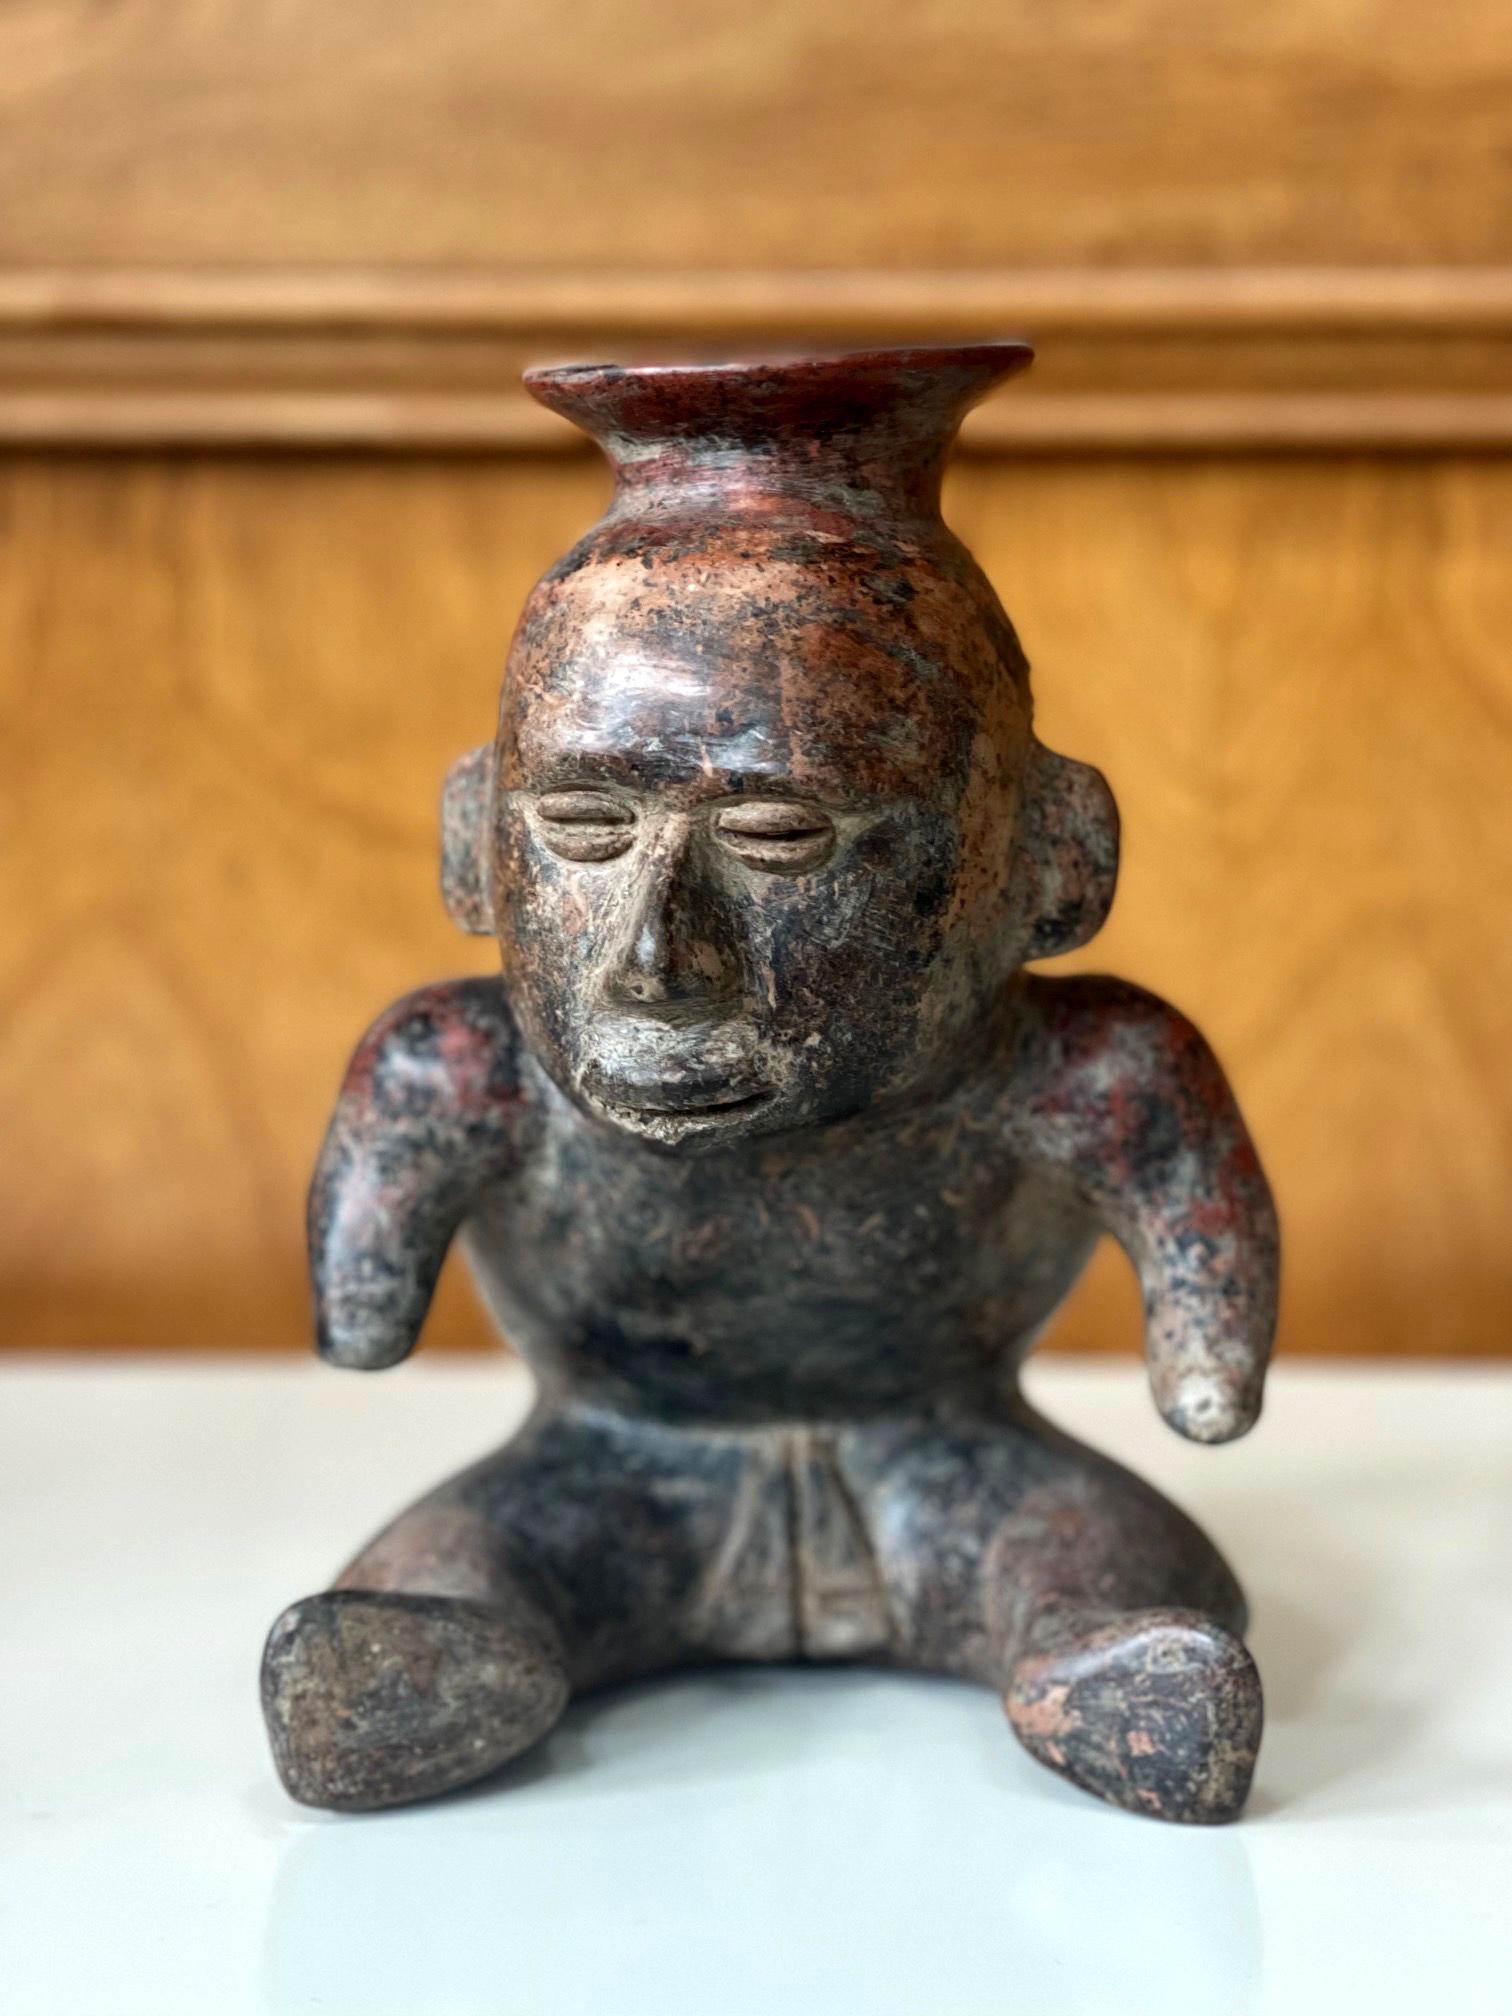 A pre-Columbian figural vessel from West Mexico Colima culture (circa 300BC-400AD). Made of molded clay, the stoneware vessel depicts a seated hunchback woman with truncated style arms and opening sprout on top of the head. The highly stylized